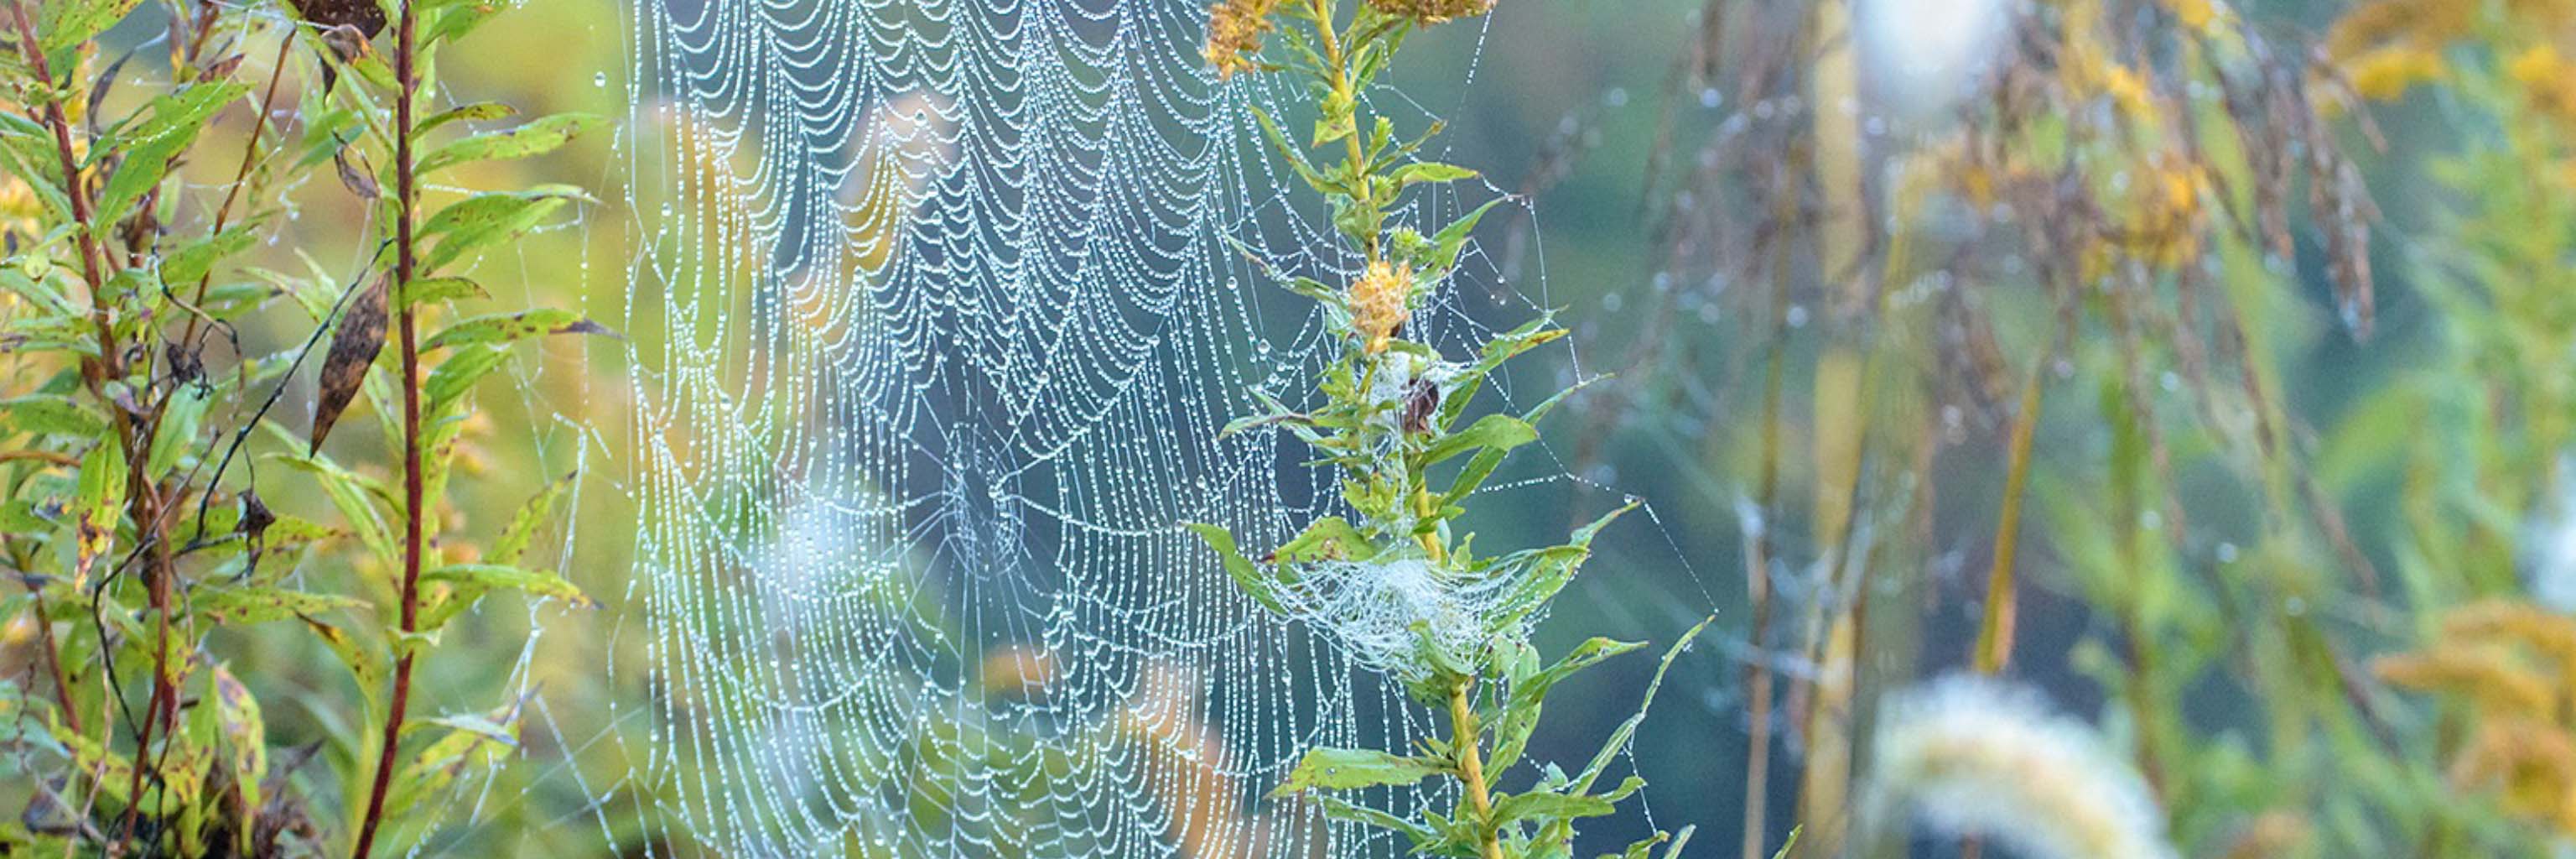 Morning dew highlights the doily-like spider web suspended among flowering goldenrods.